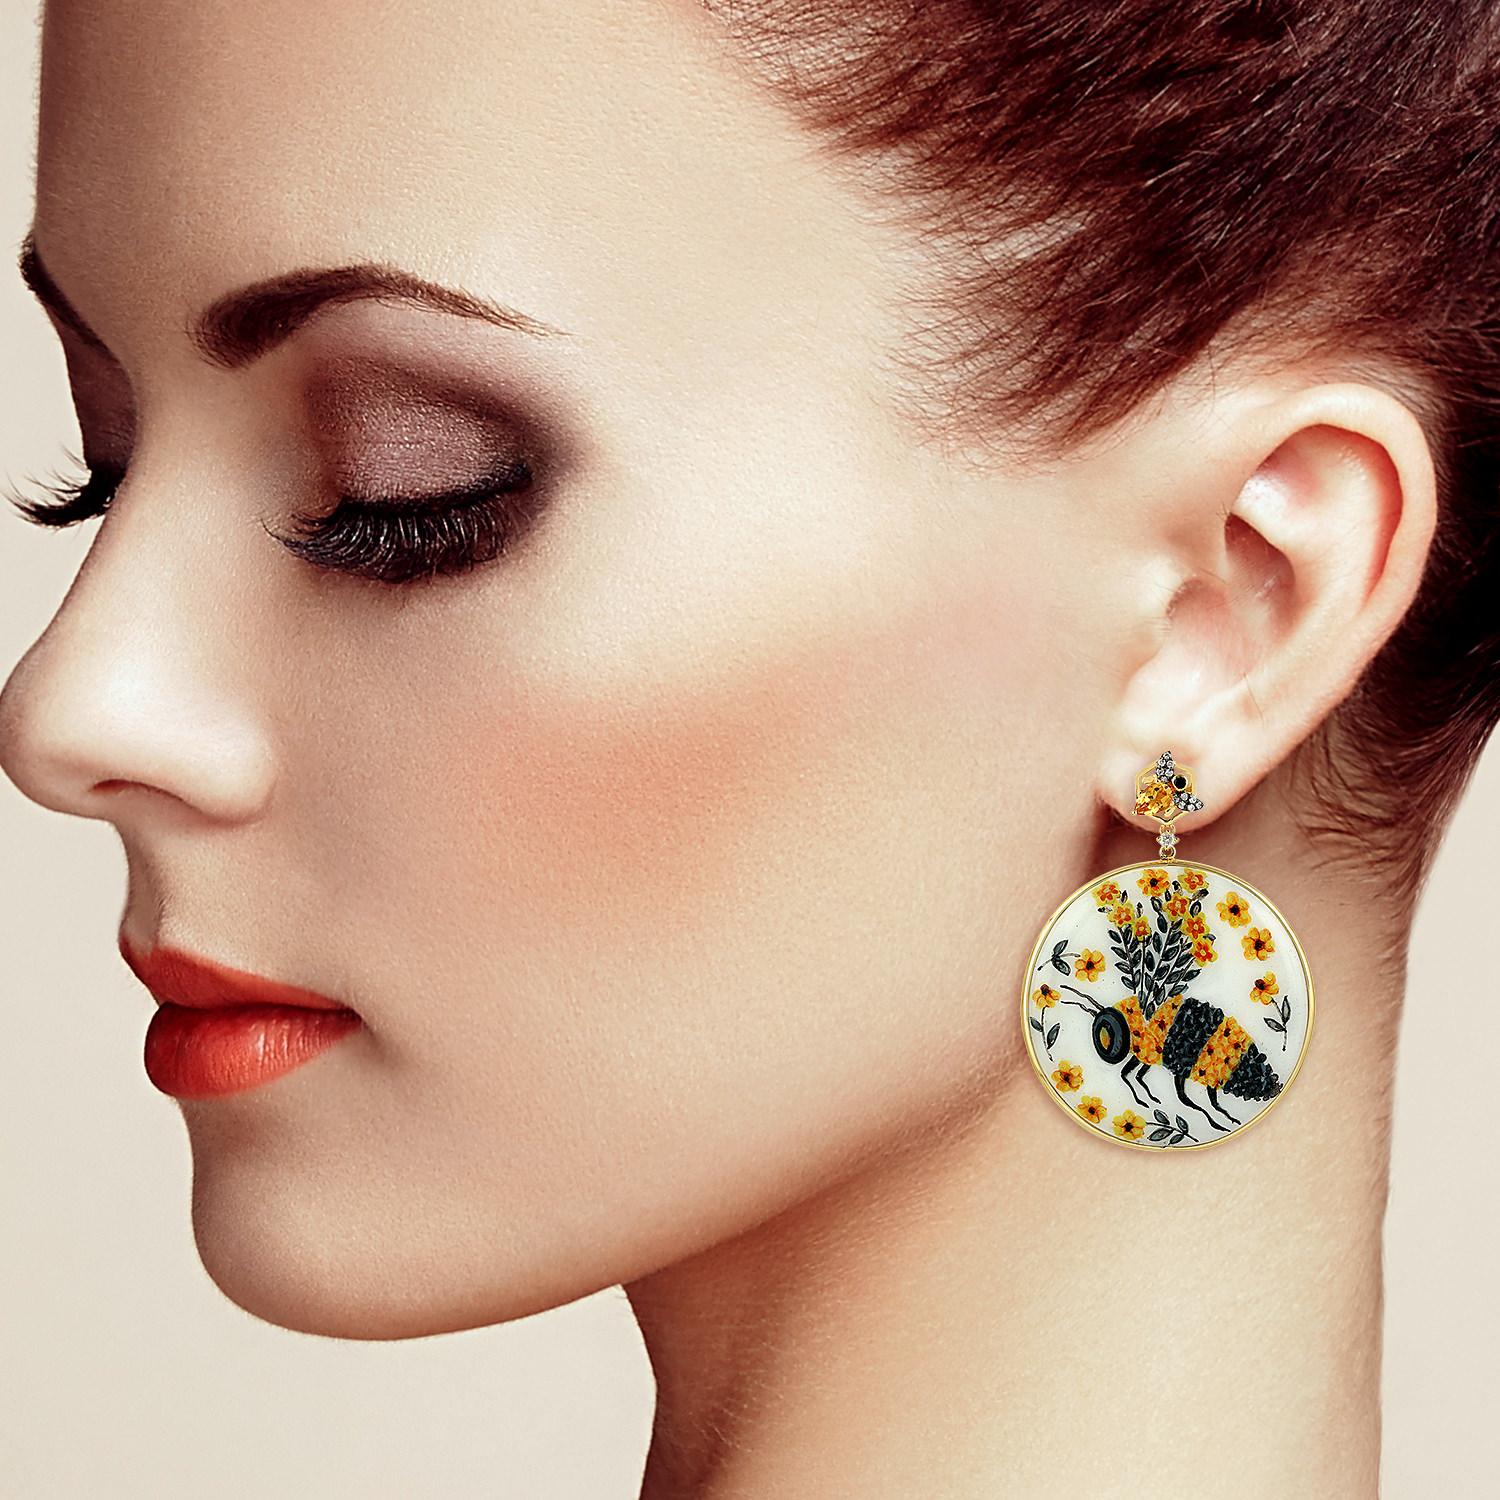 These beautiful enamel earrings features unique hand painted miniature art. Cast in 18K gold. It is set with .86 carats citrine, 78.11 carats bakelite & .35 carats pave diamonds. 

The ring is a size 7 and may be resized to larger or smaller upon